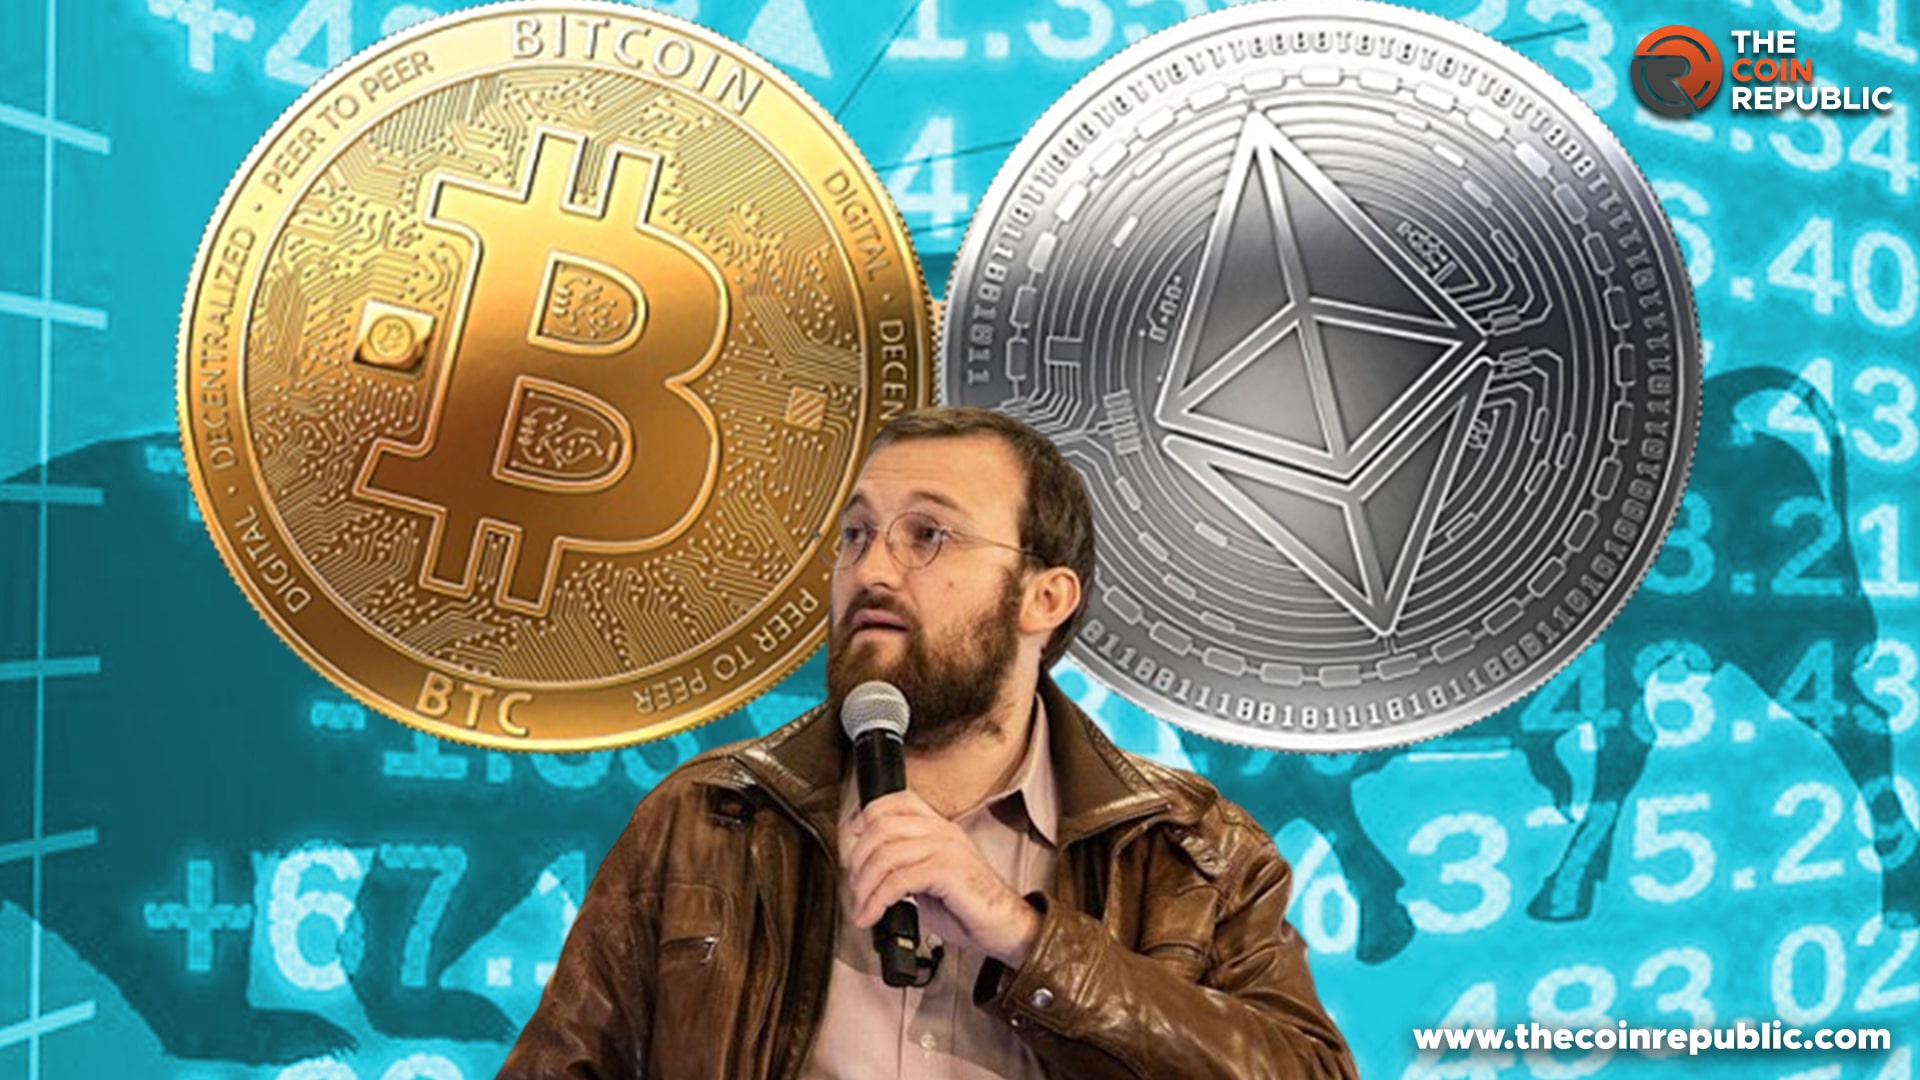 Cardano Creator Highlights Ethereum and Bitcoin Weak Points